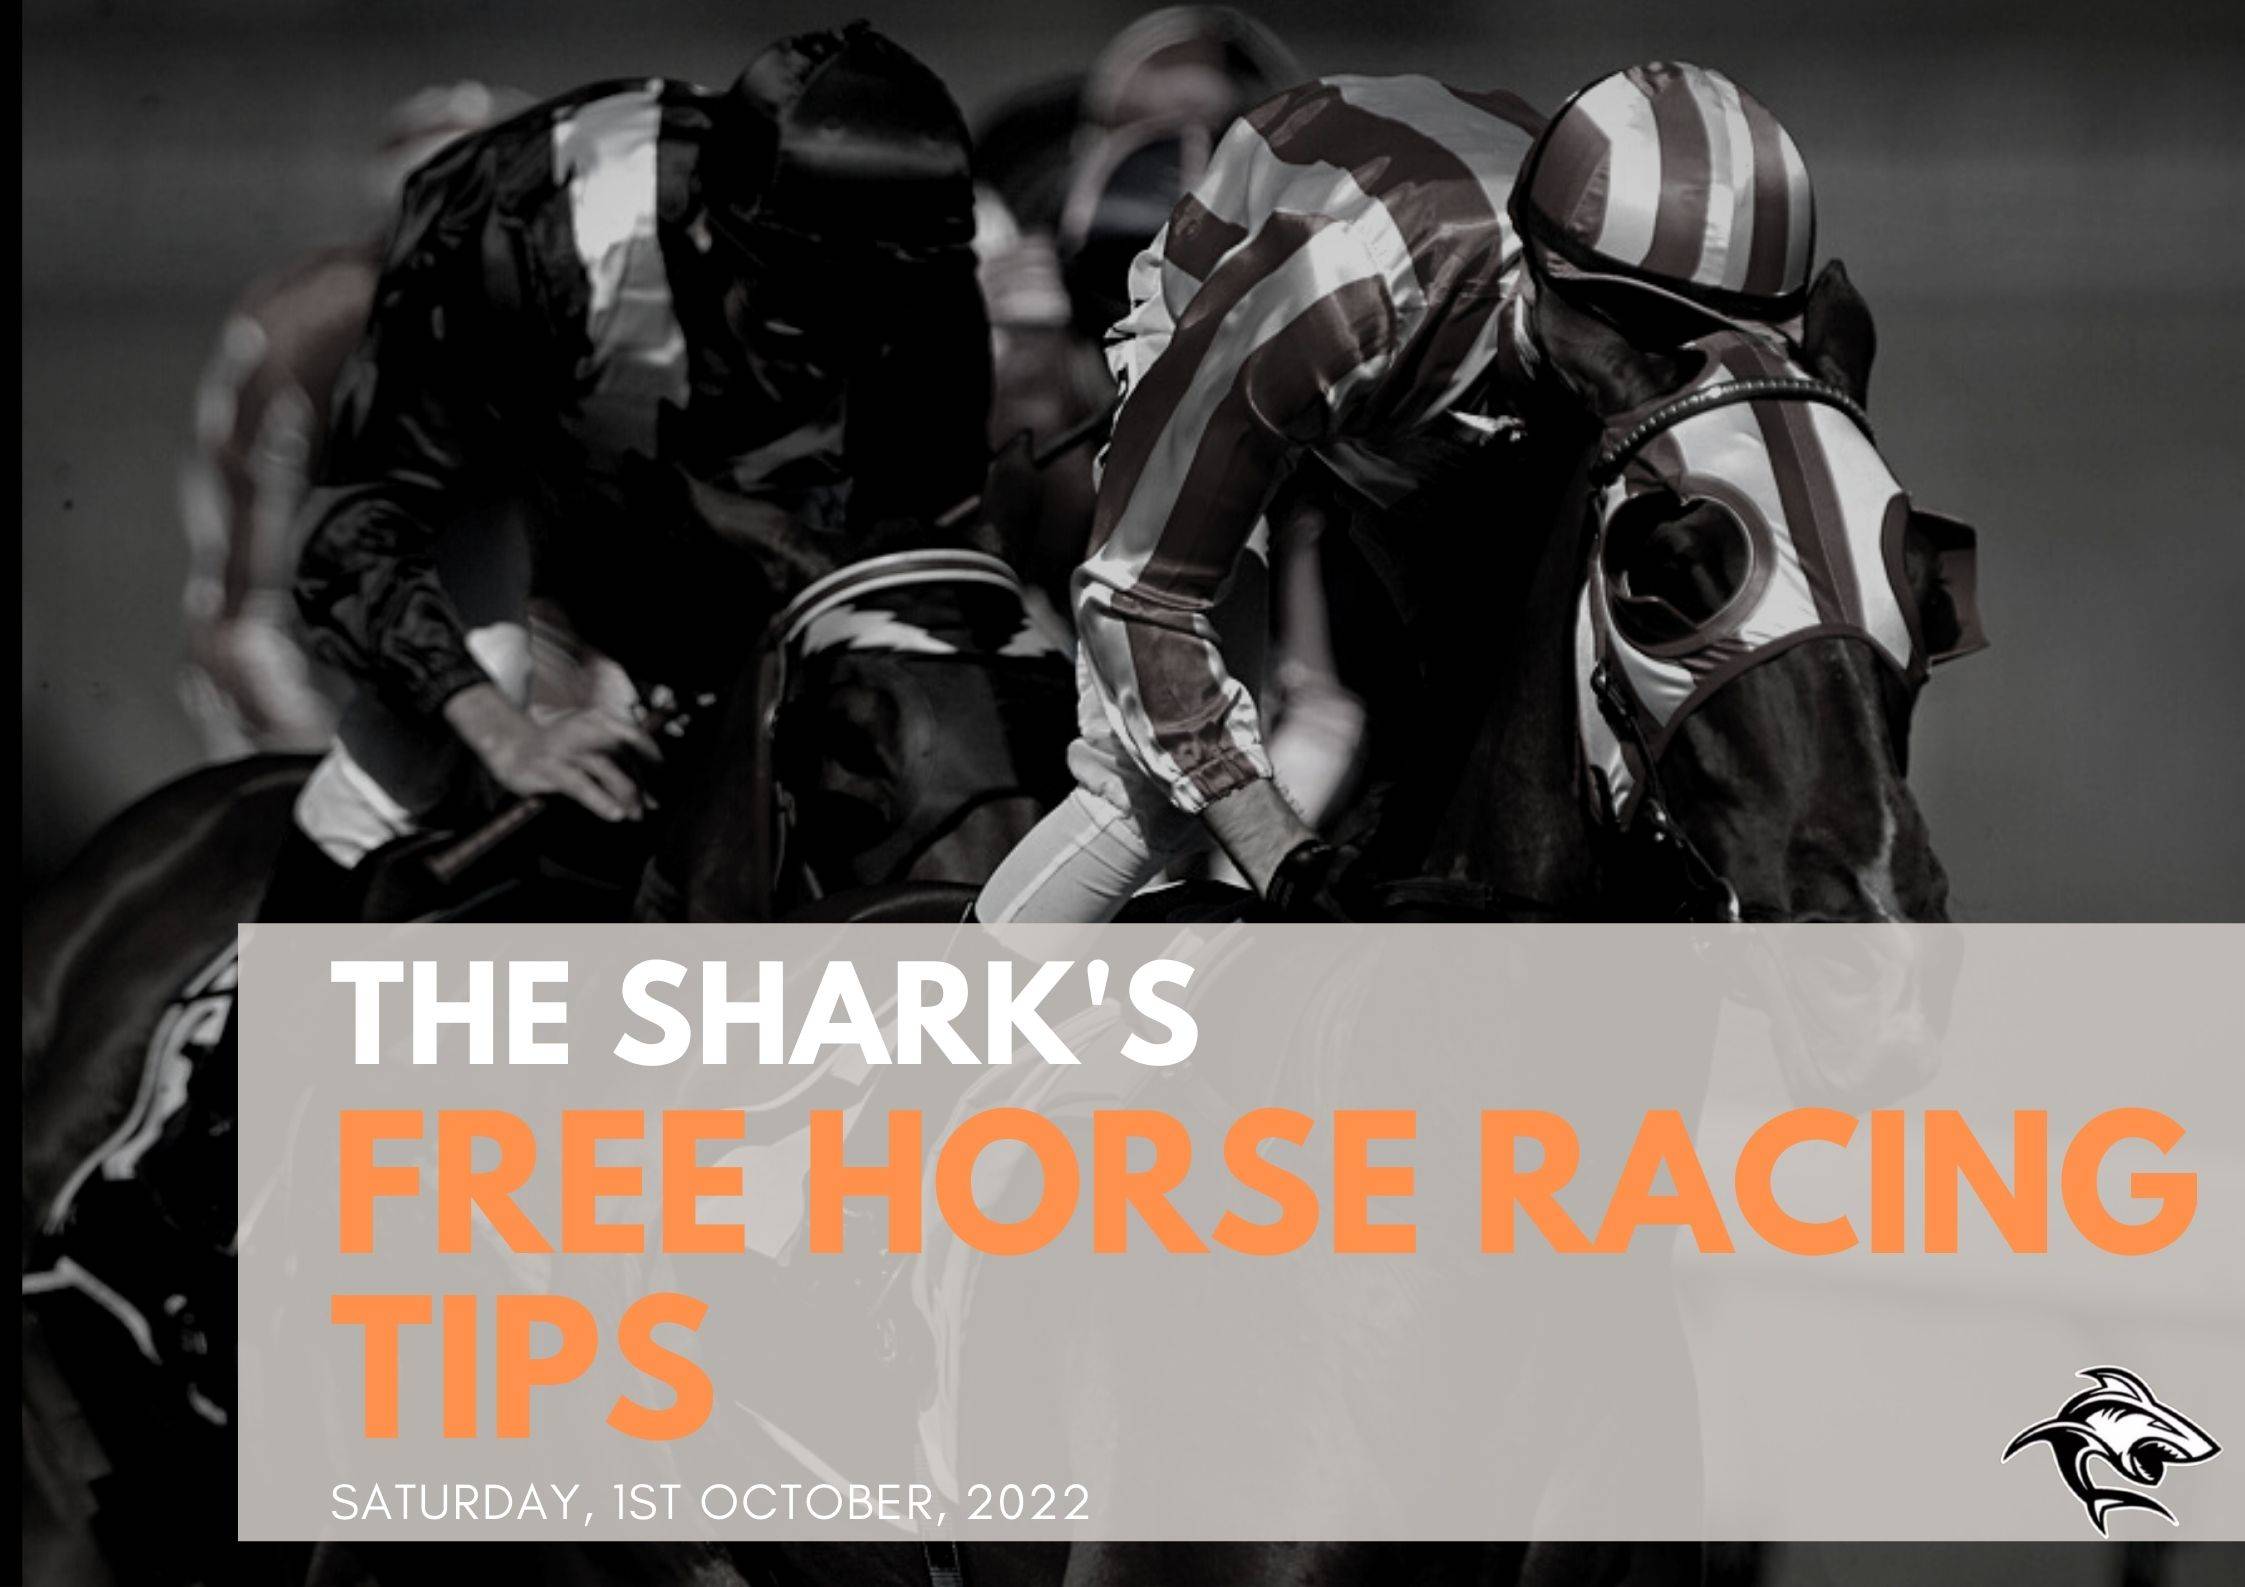 Free Horse Racing Tips - 1st Oct